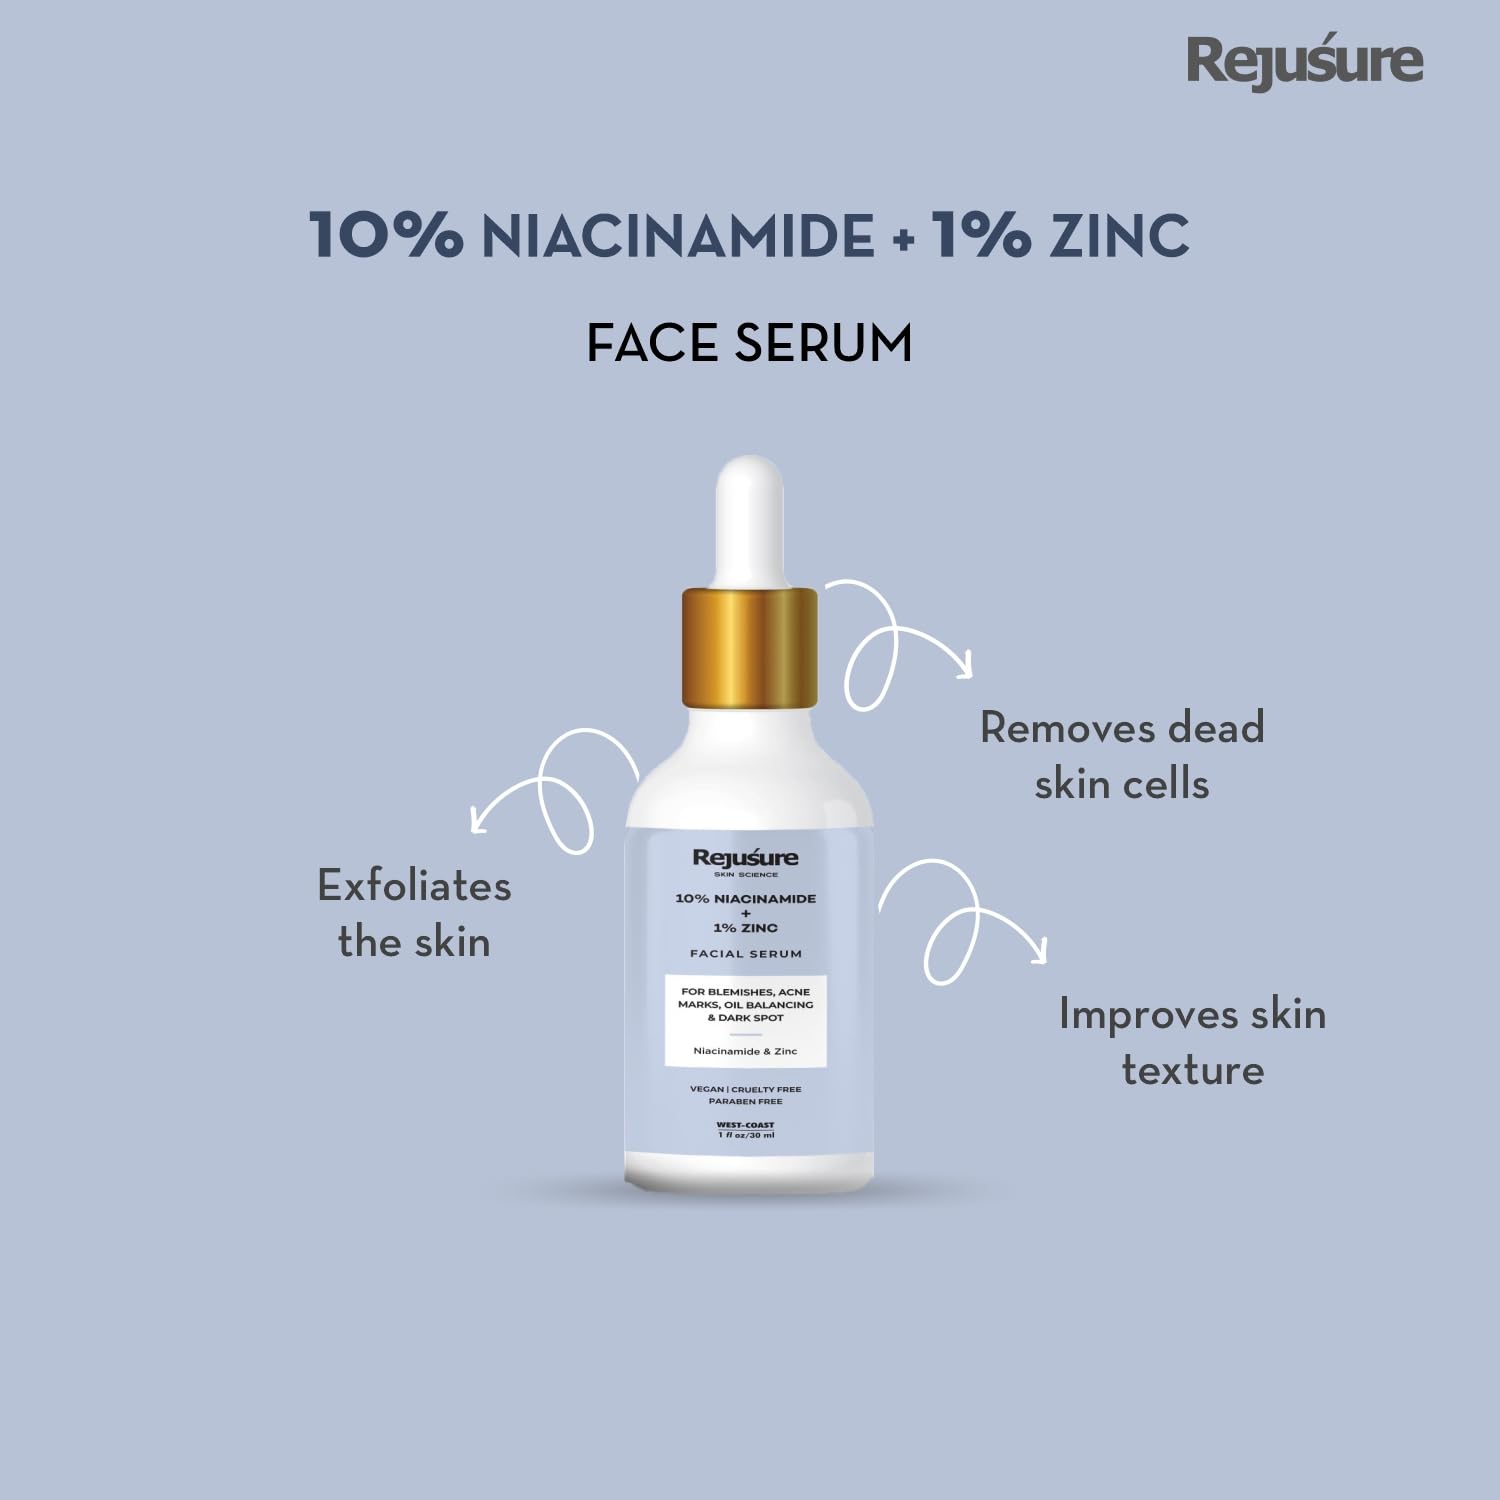 Rejusure Skin Renewal Duo | 2% Salicylic Acid Facial Serum (30ml) & Niacinamide 10% + Zinc 1% Face Serum (30ml) - Complete Skincare Package for Clear and Healthy Skin